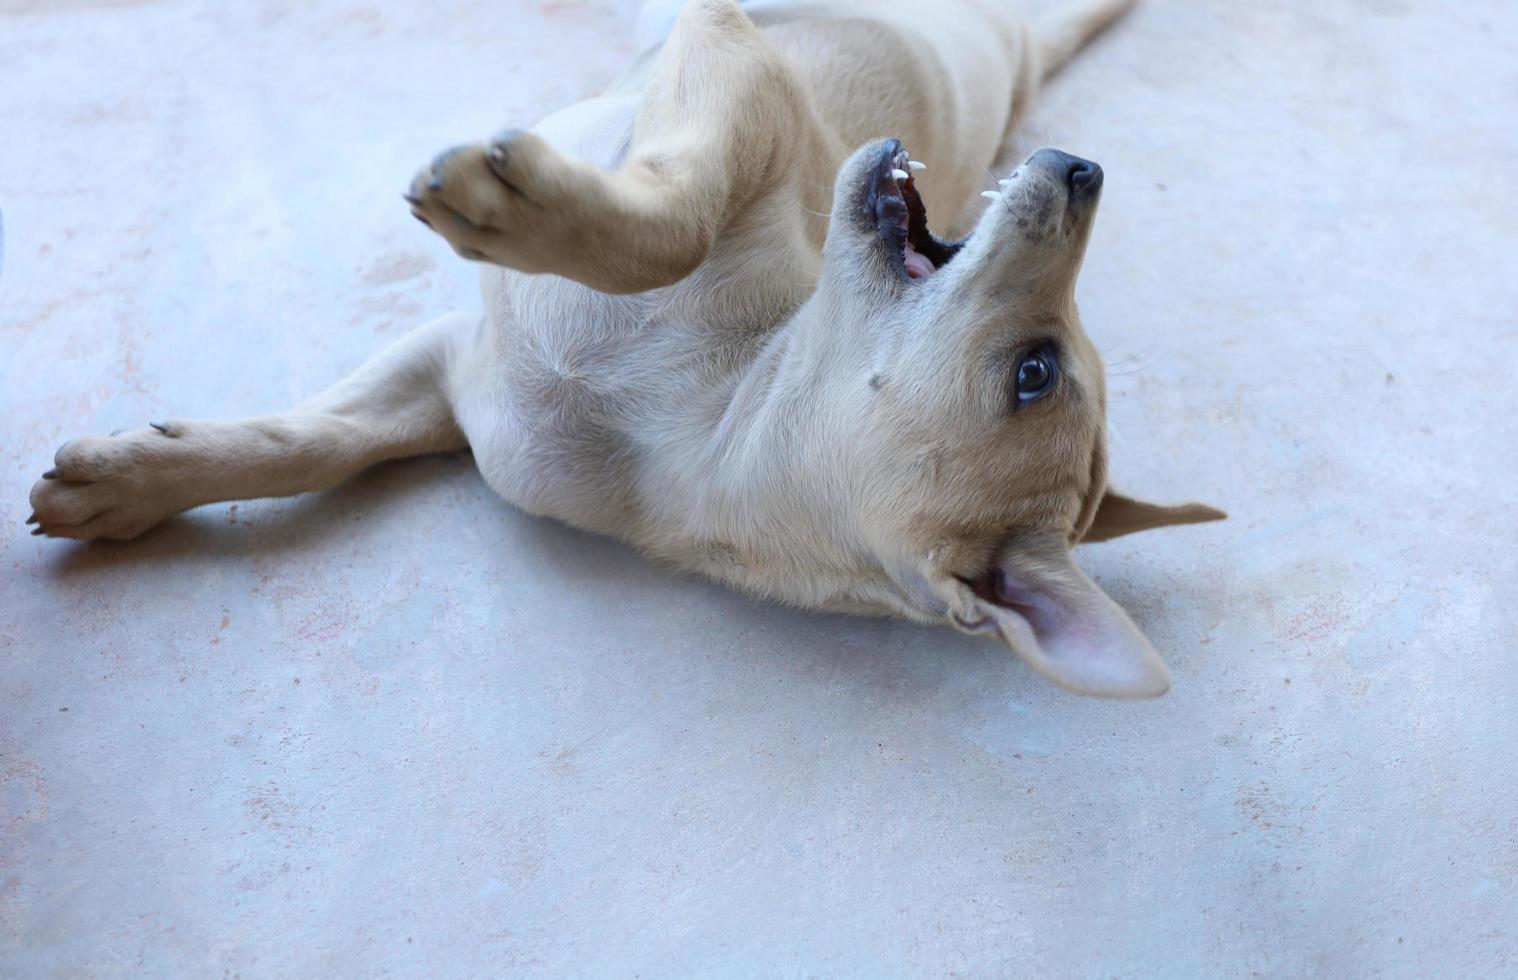 A small Thai dog playing on the concrete in the house. photo